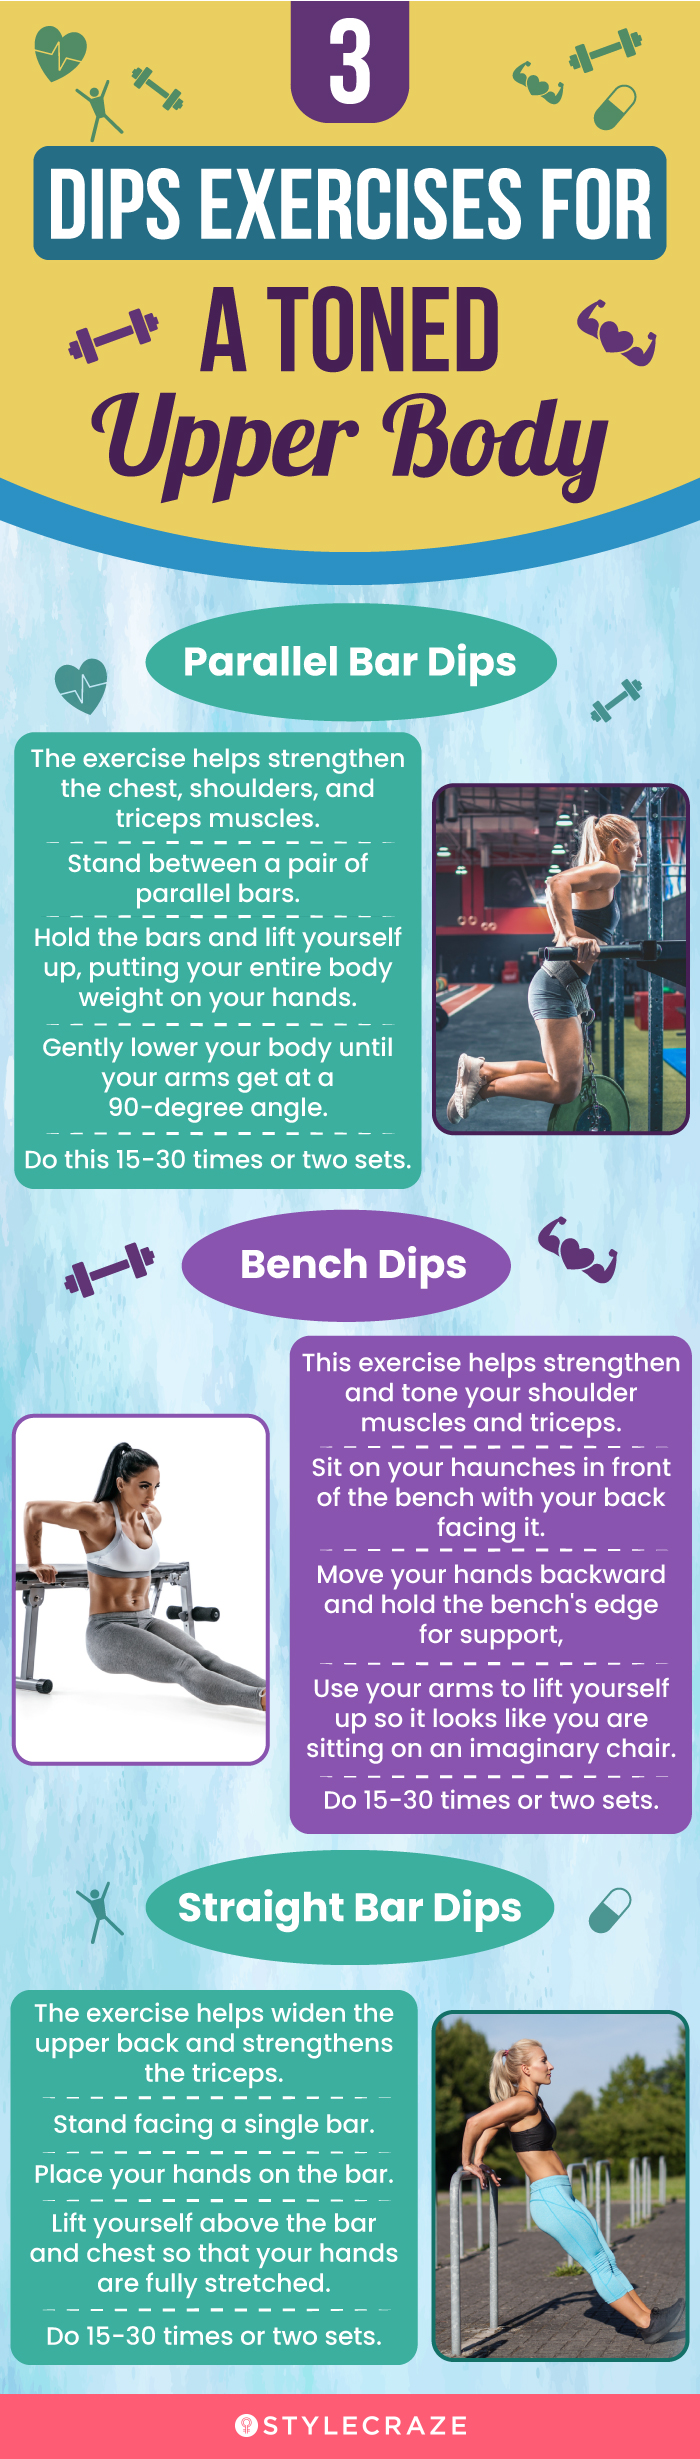 3 dips exercises for a toned upper body (infographic)